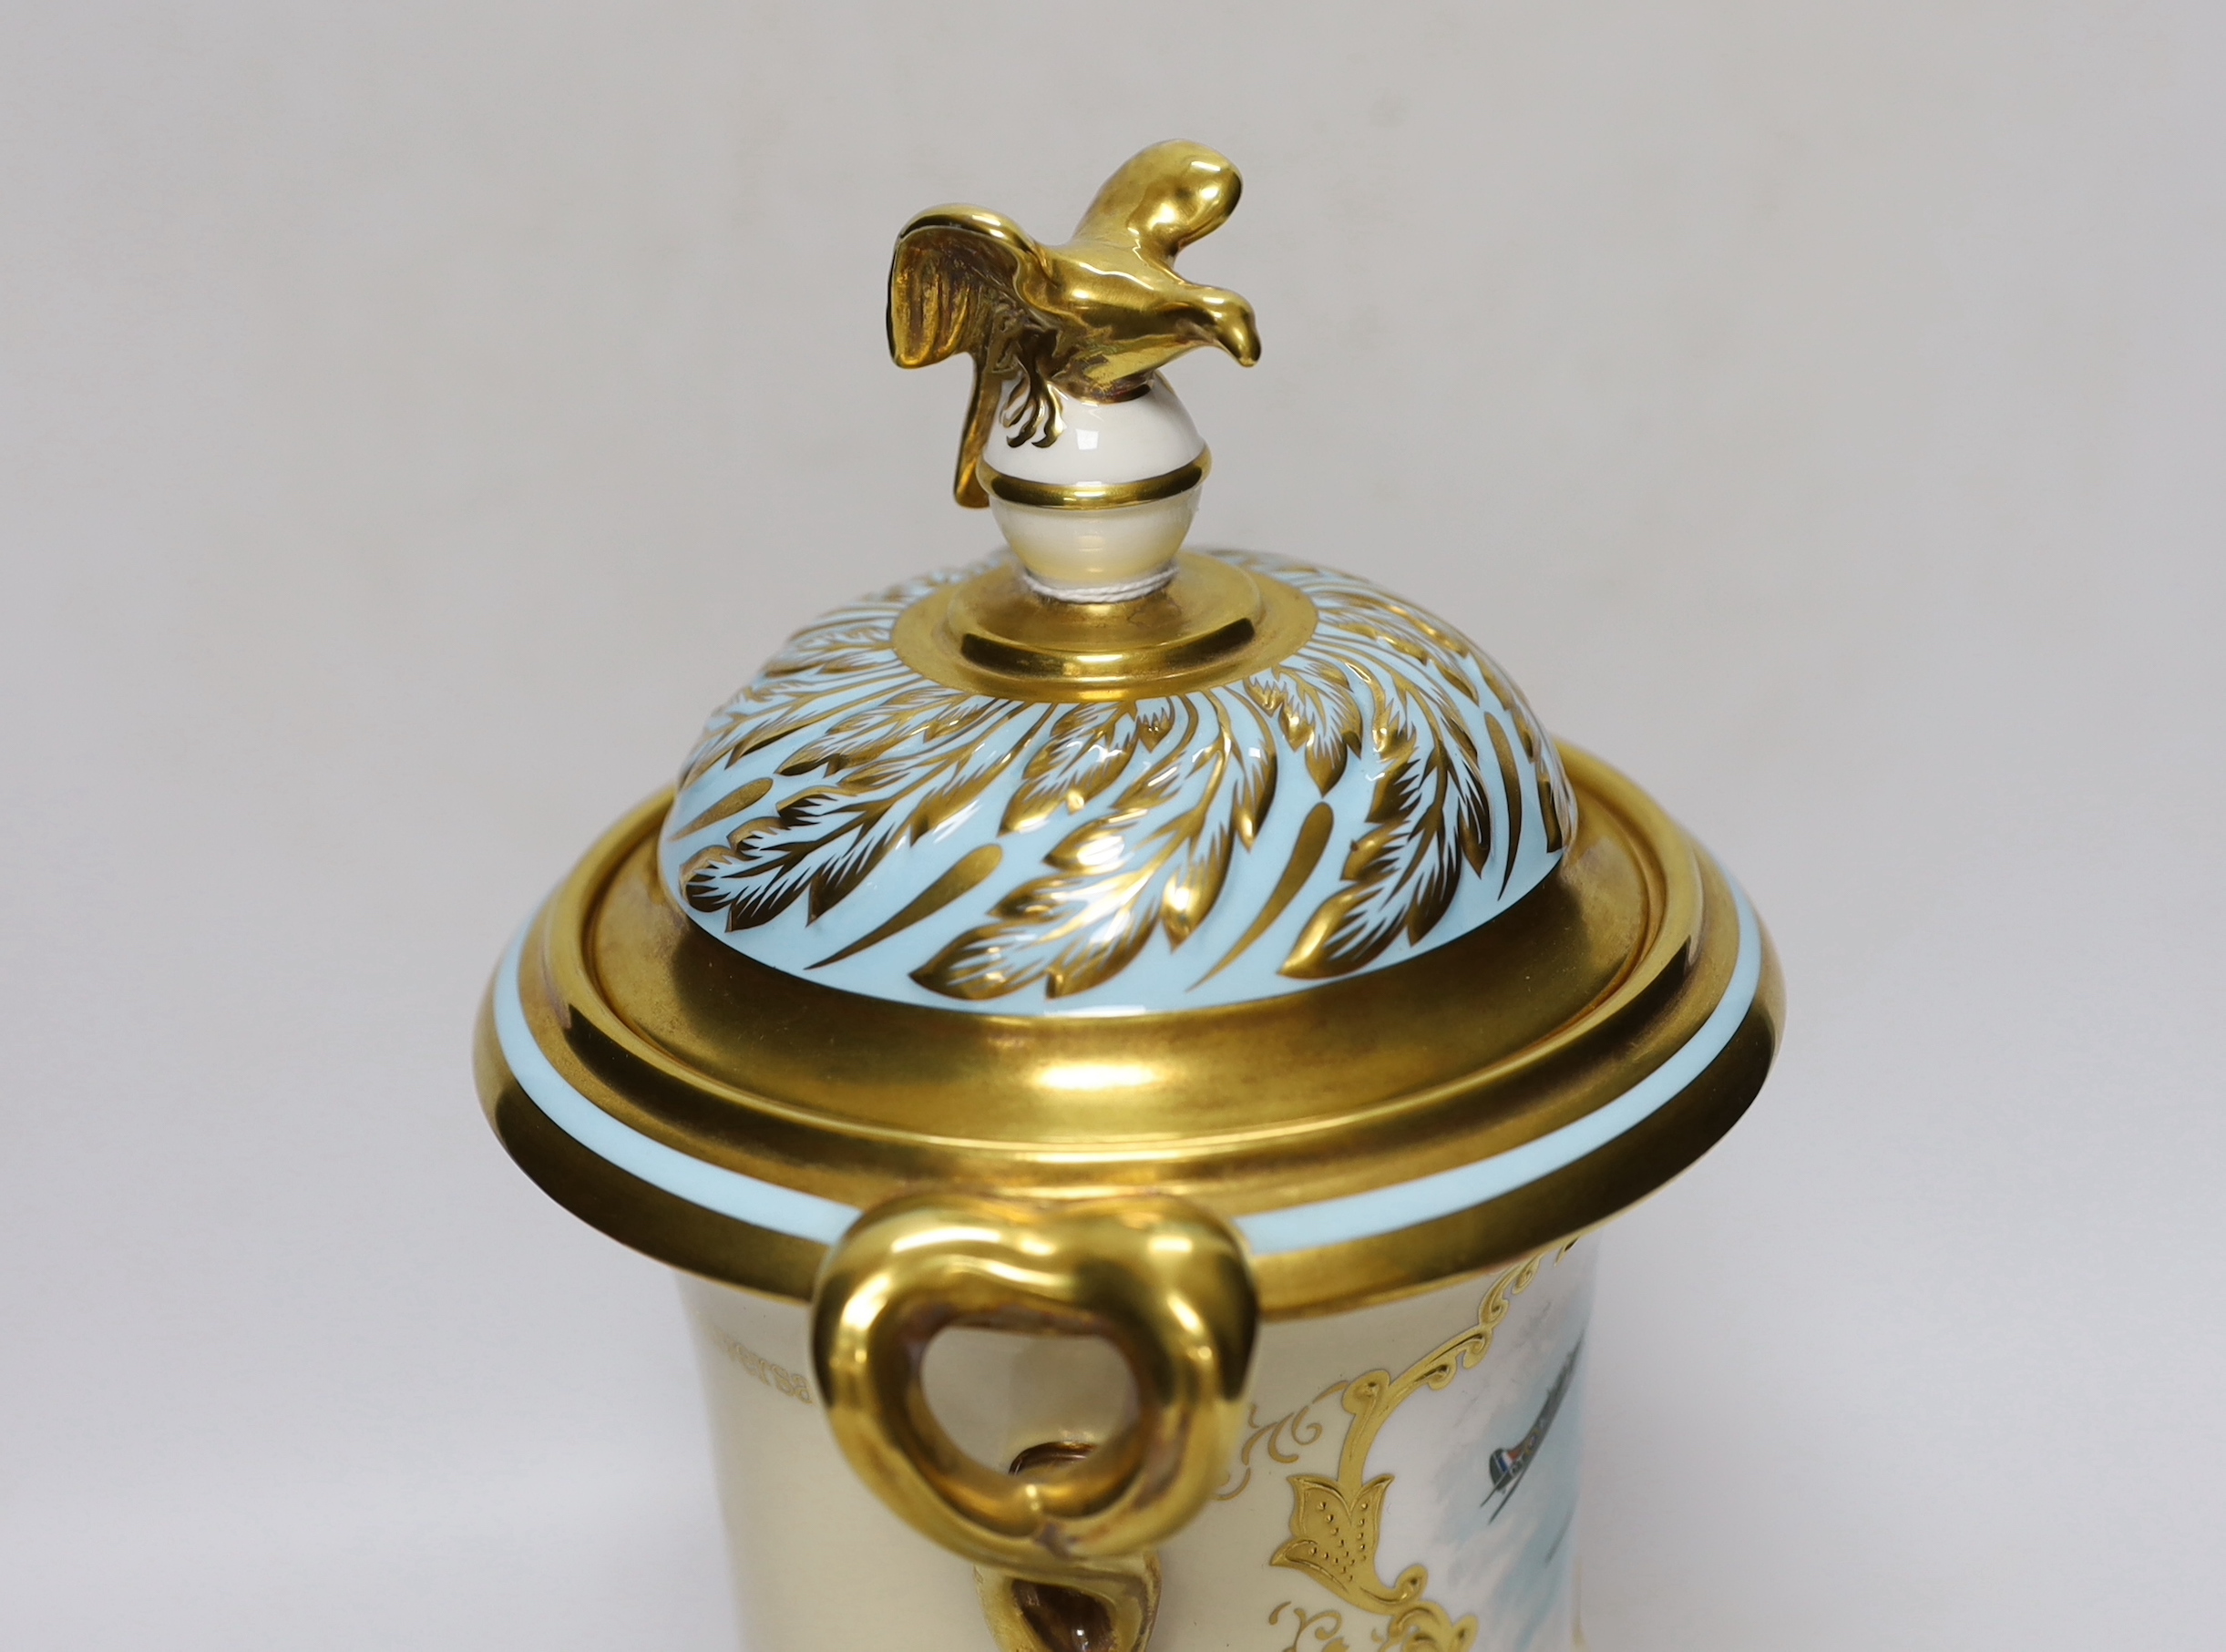 A Coalport boxed presentation urn and cover, signed M Harnett, limited edition of 50, no 40, 32cm high